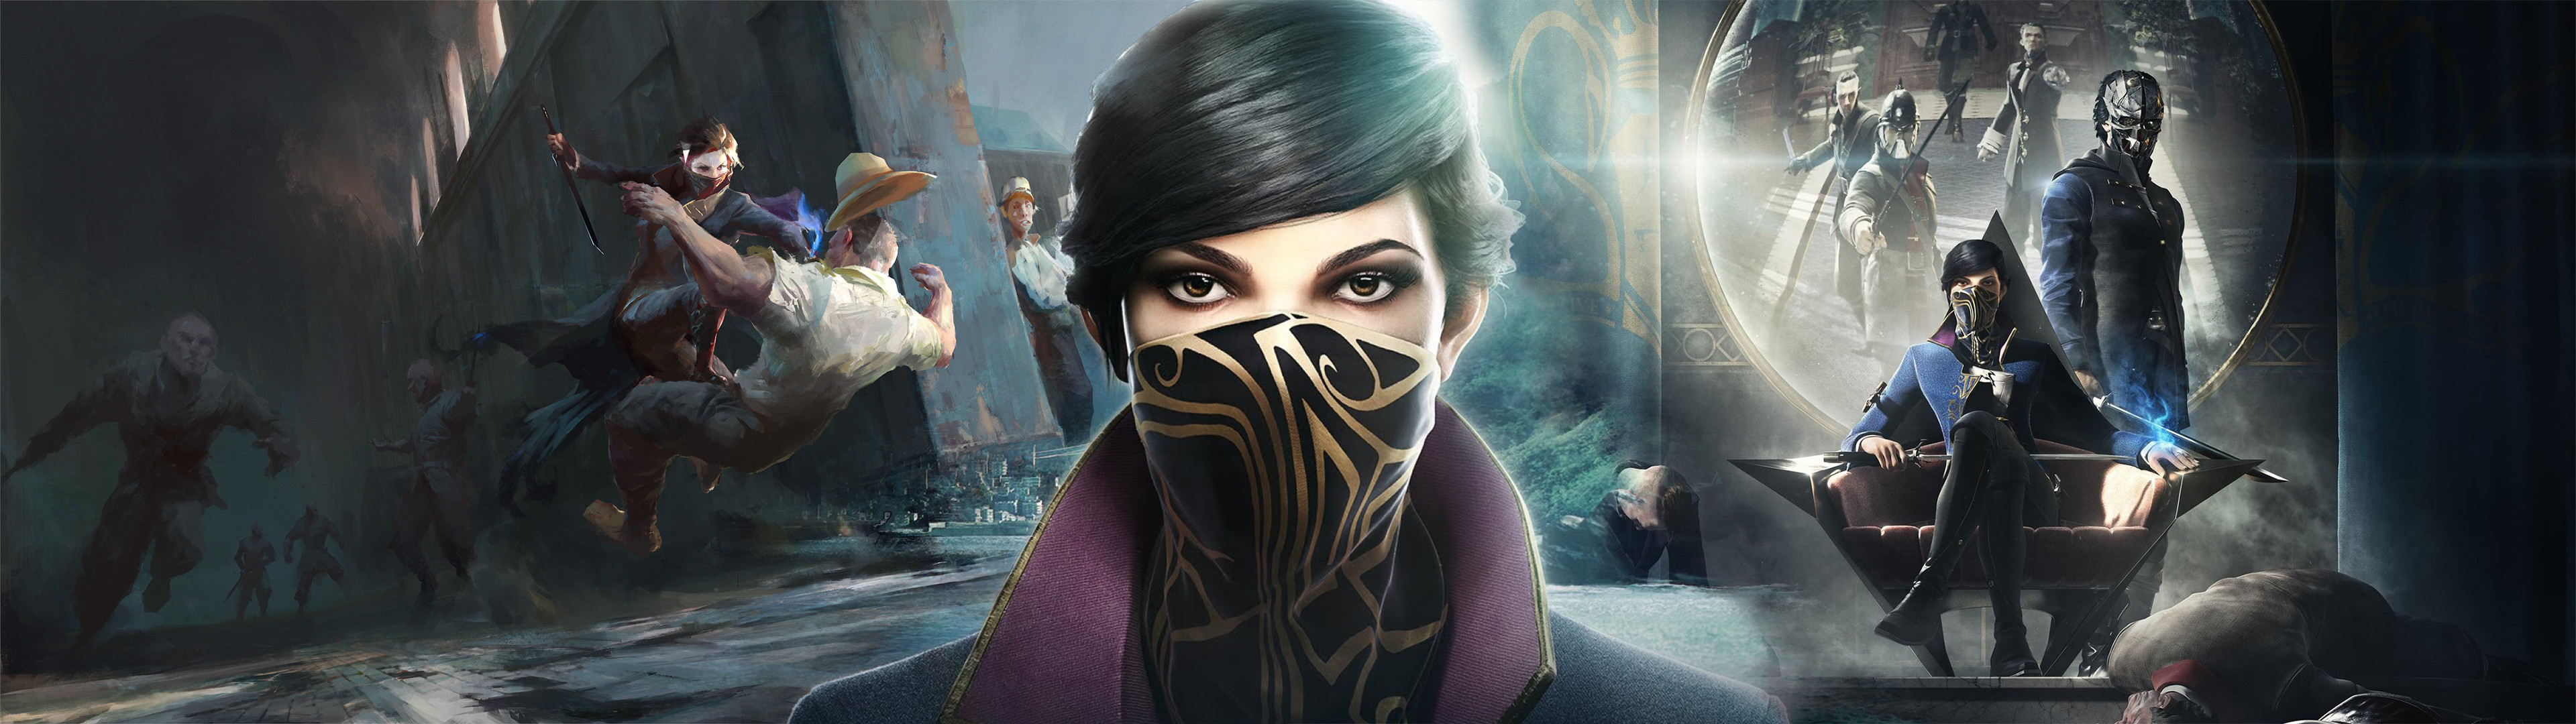 3840x1080 ... Dishonored 2 Dual Screen Wallpaper by Lariatura